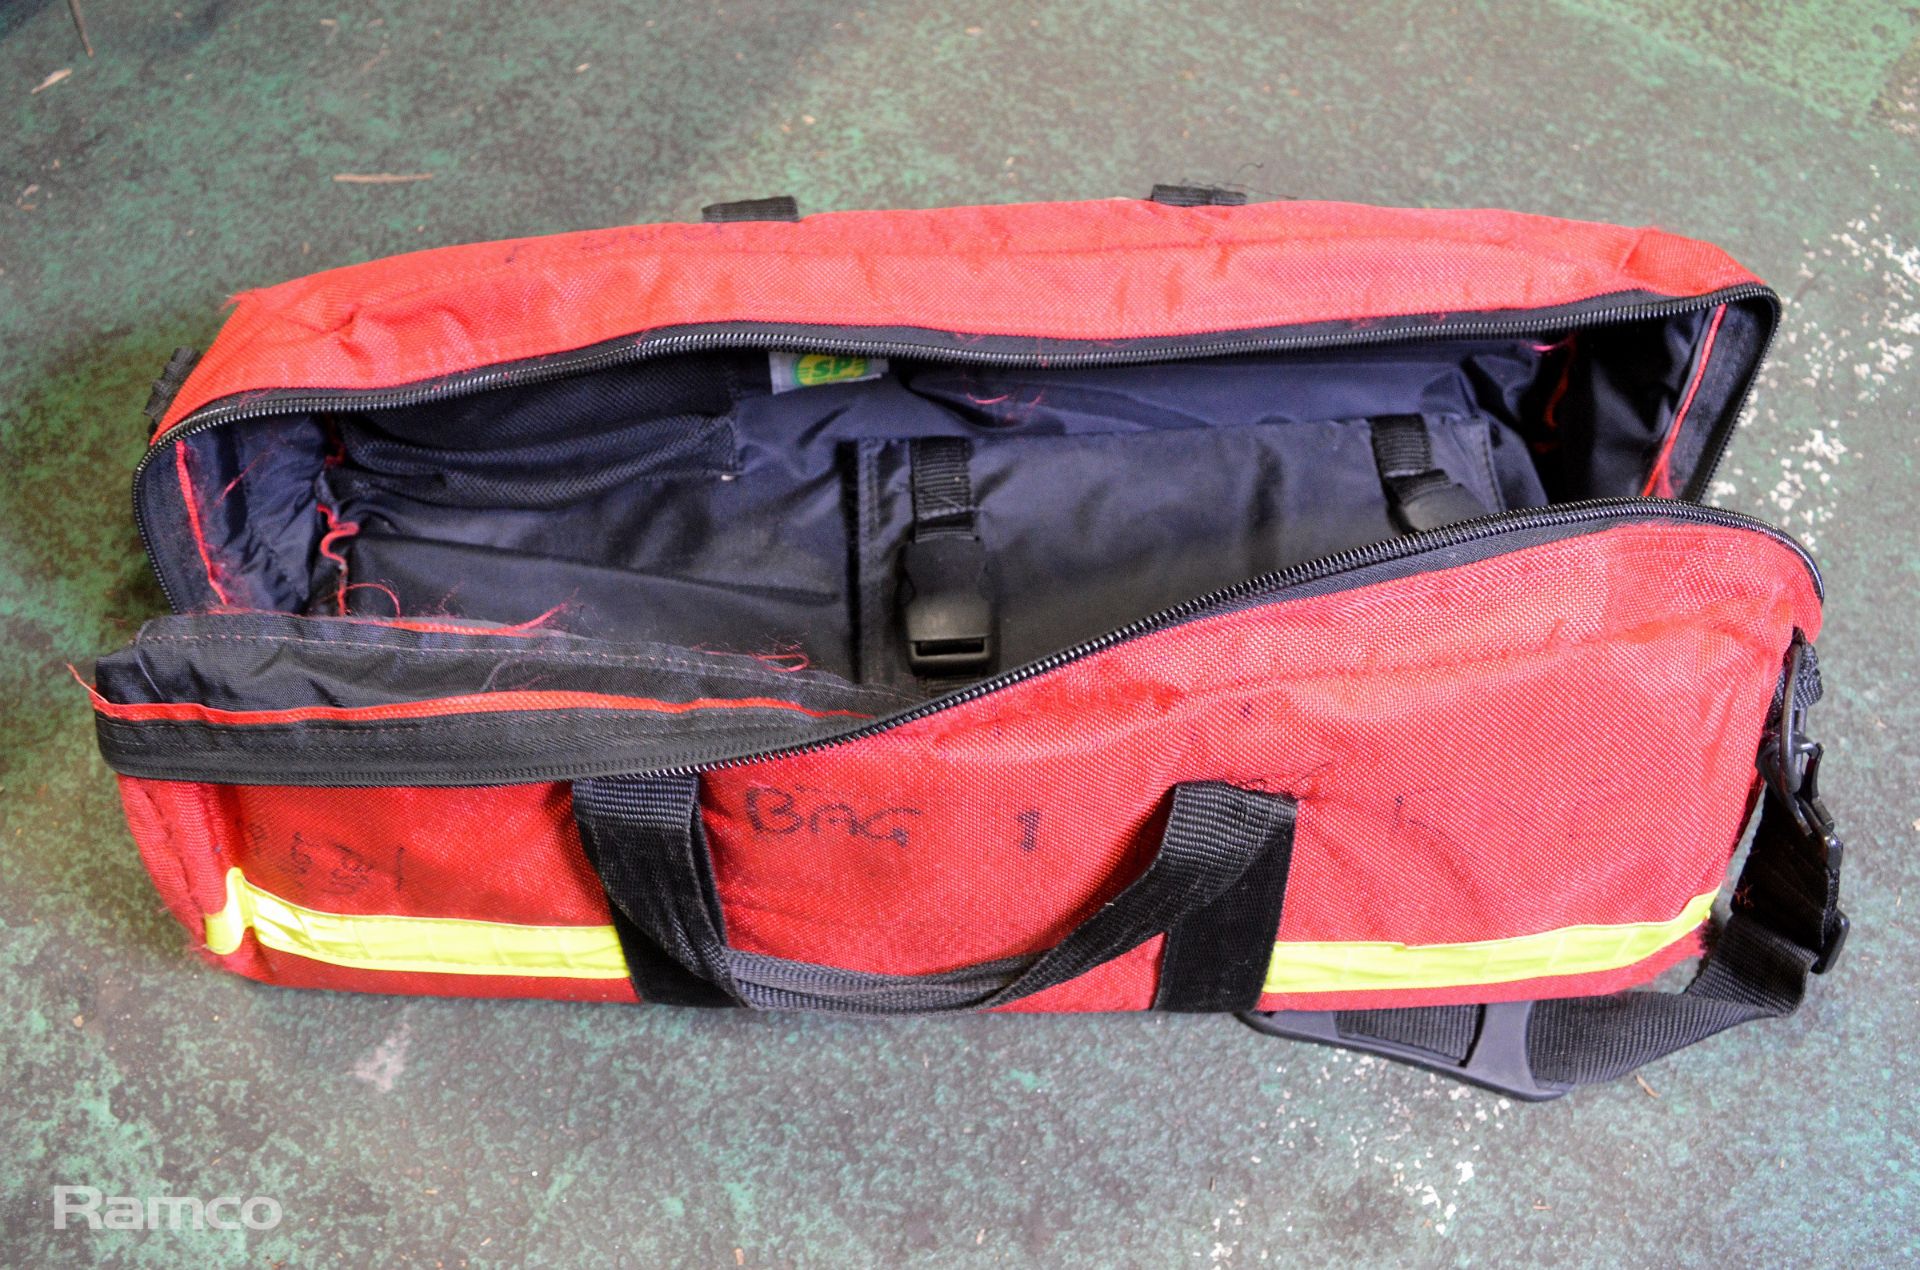 12x Red Medical Bags - various makes - Image 4 of 5